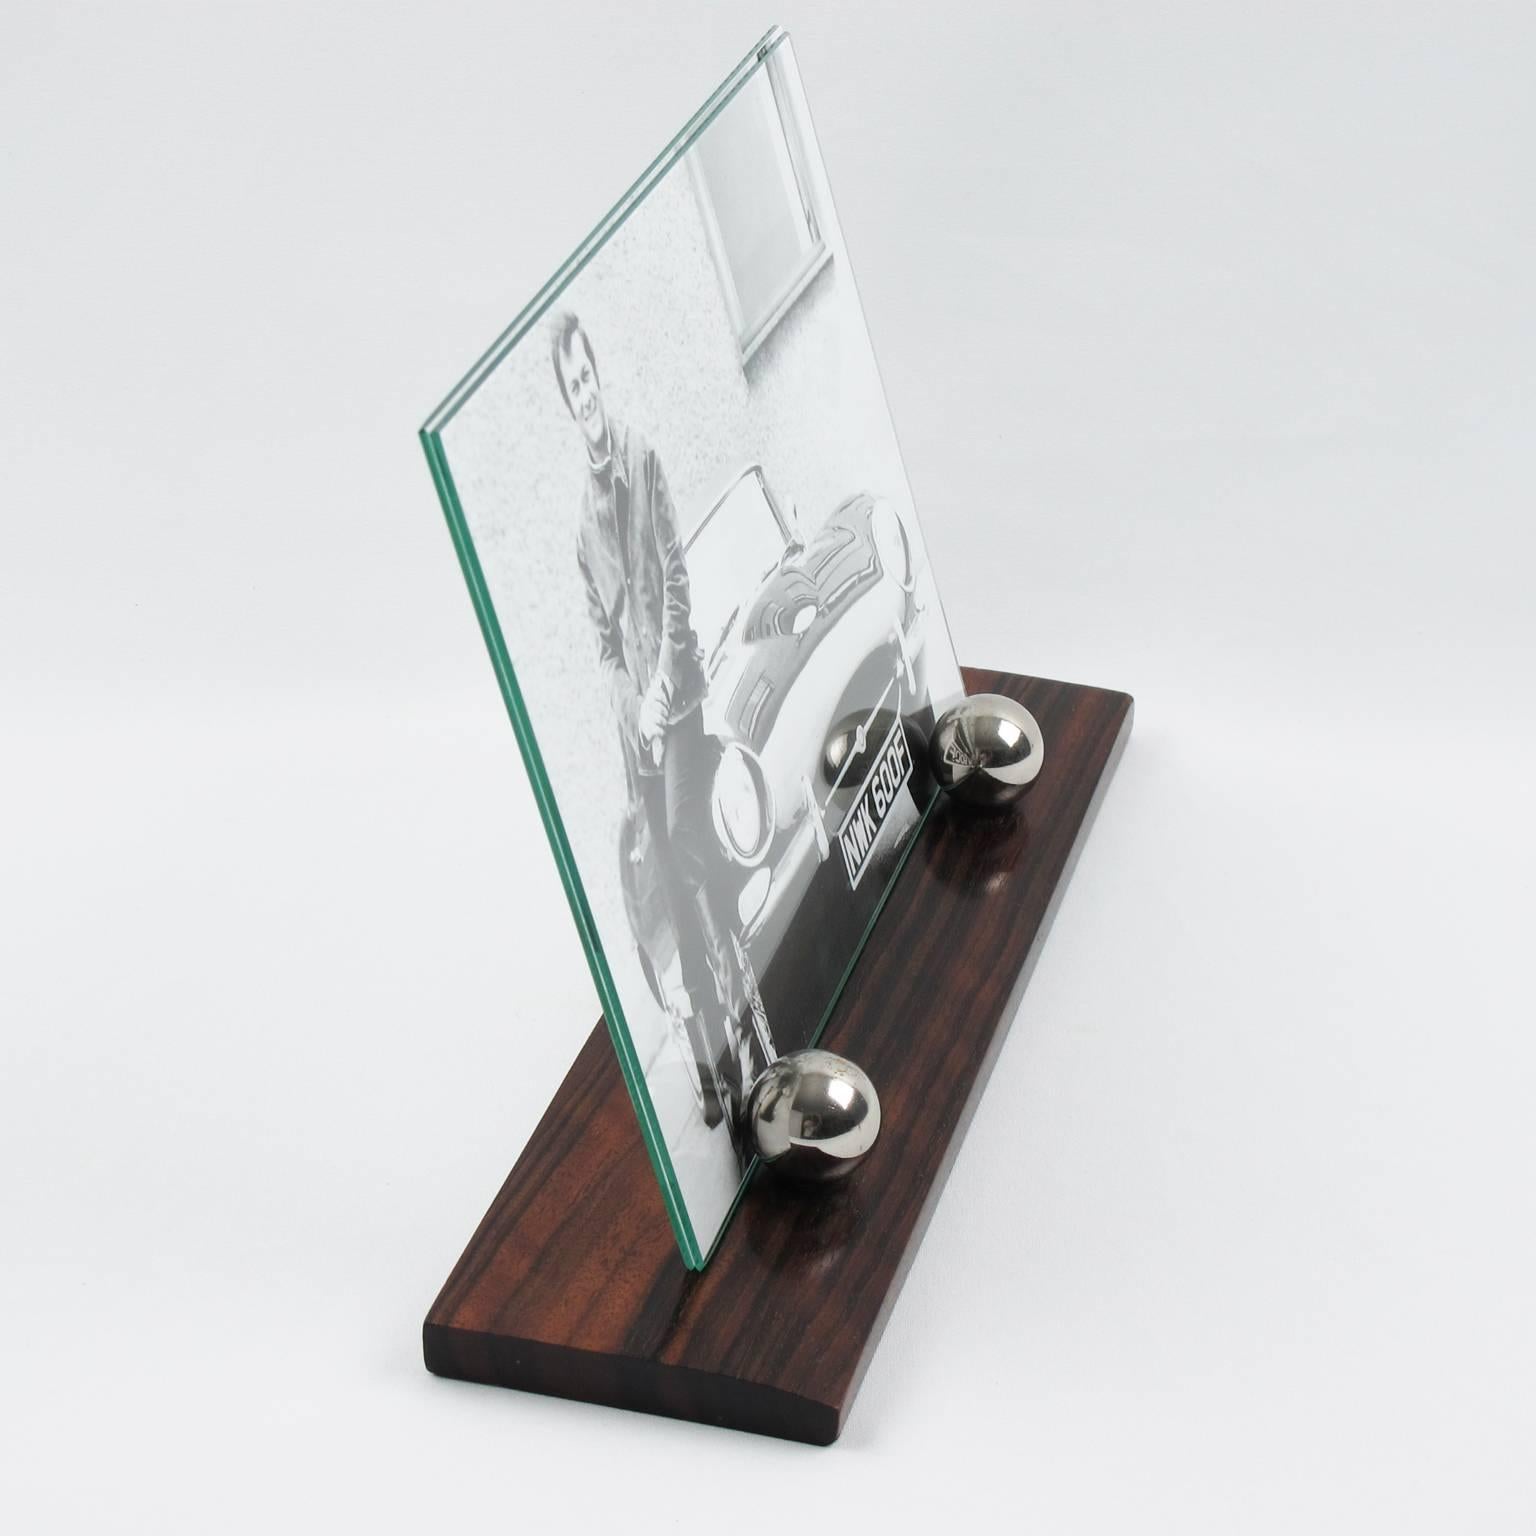 Elegant French Art Deco picture photo frame. Featuring thick hand-rubbed Macassar wood plinth compliment with two polished chrome metal balls. The frame is complete with its two glass sheets to enclose the photograph. Very good vintage condition.